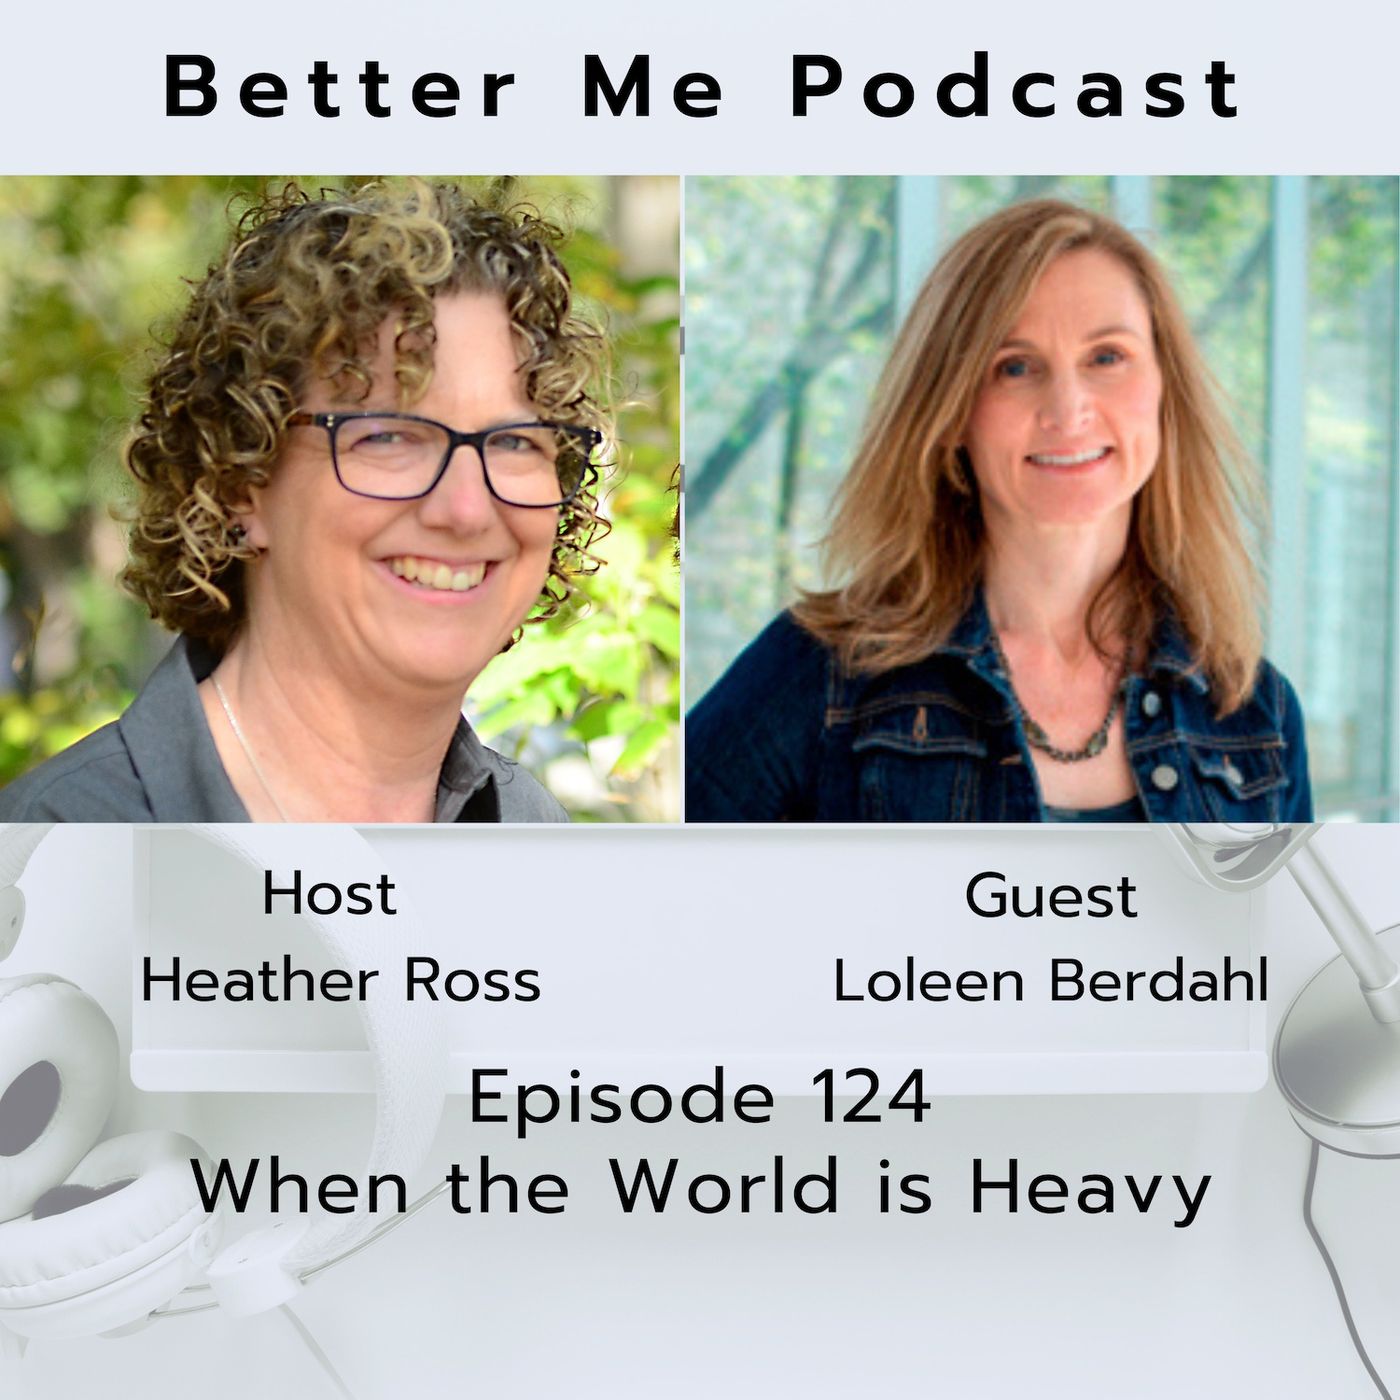 EP 124 When the World is Heavy (with guest Loleen Berdahl)